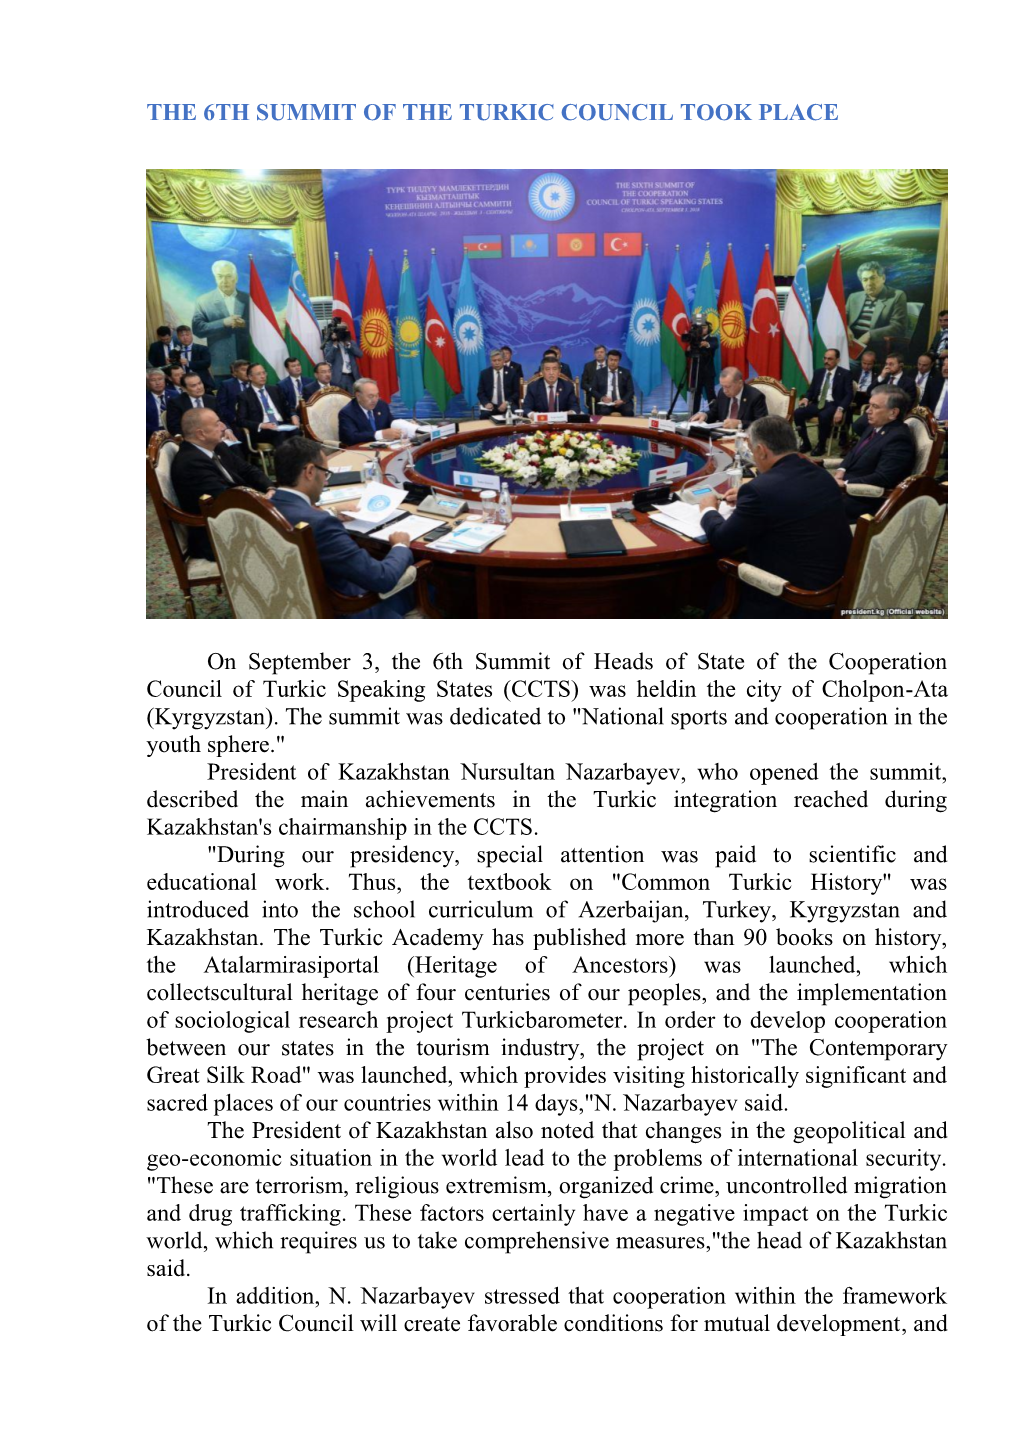 THE 6TH SUMMIT of the TURKIC COUNCIL TOOK PLACE on September 3, the 6Th Summit of Heads of State of the Cooperation Council of T